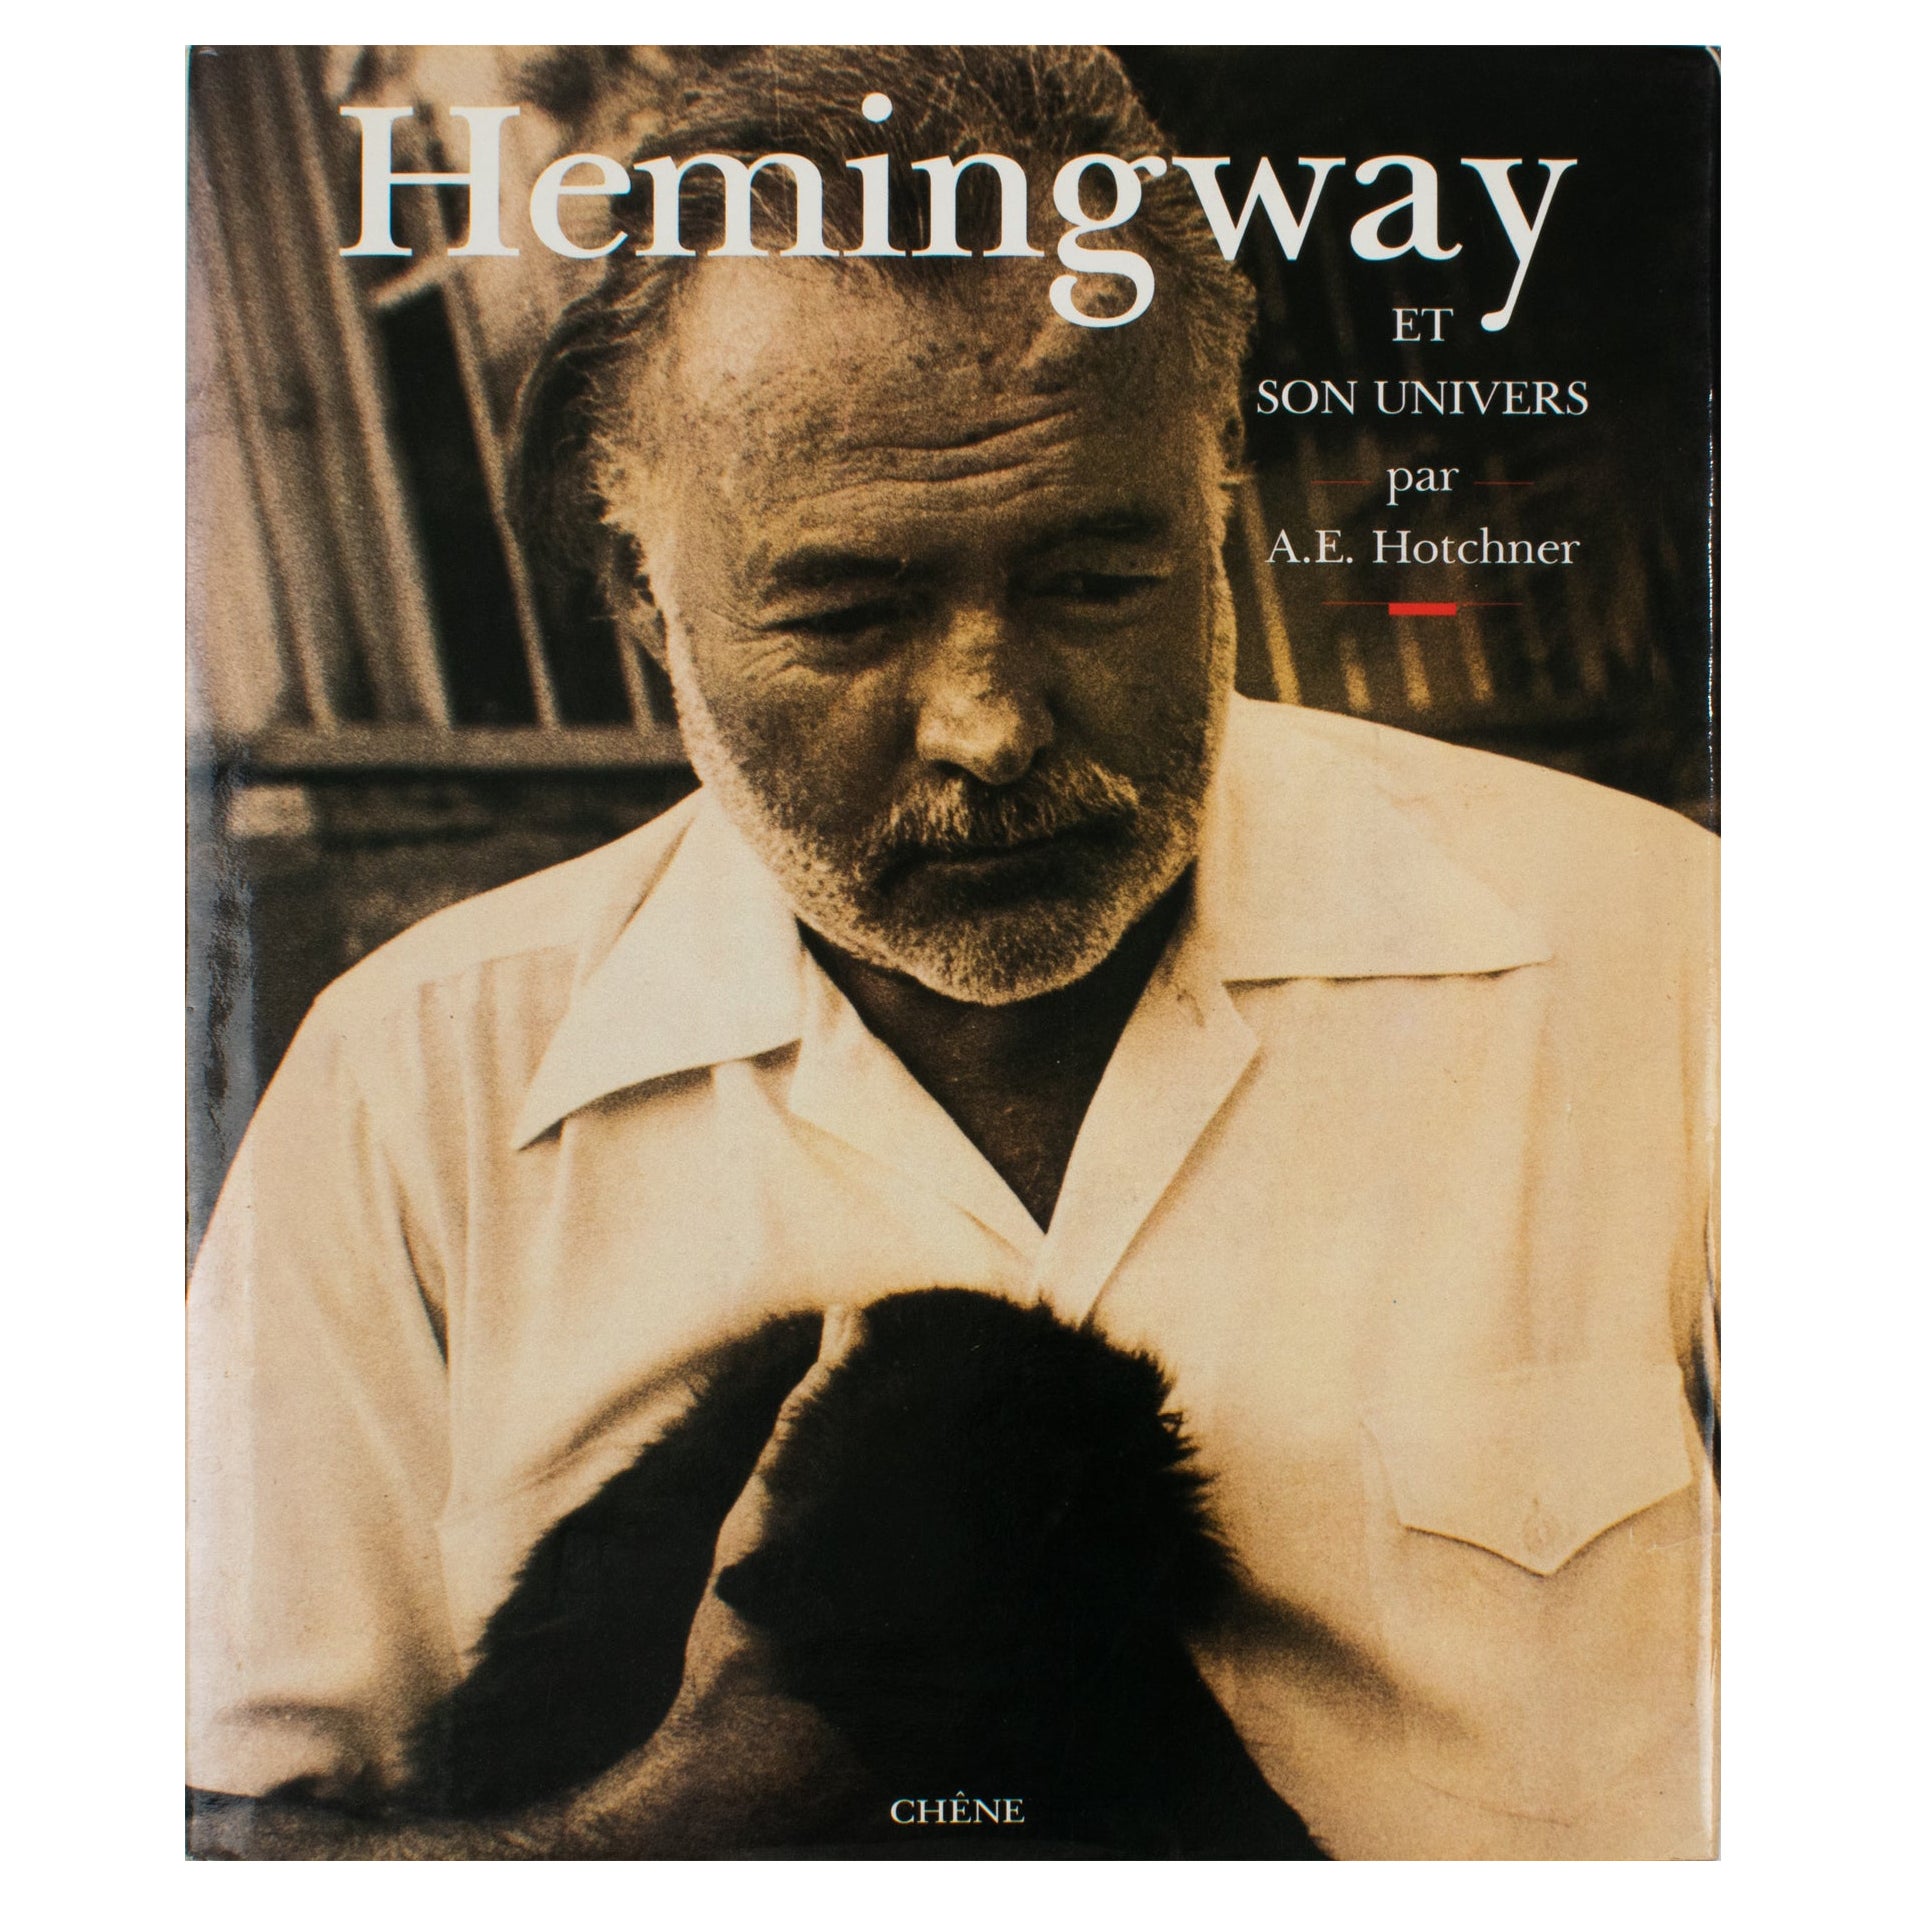 Hemingway and His Universe, French Book by A. E. Hotchner, 1990 For Sale